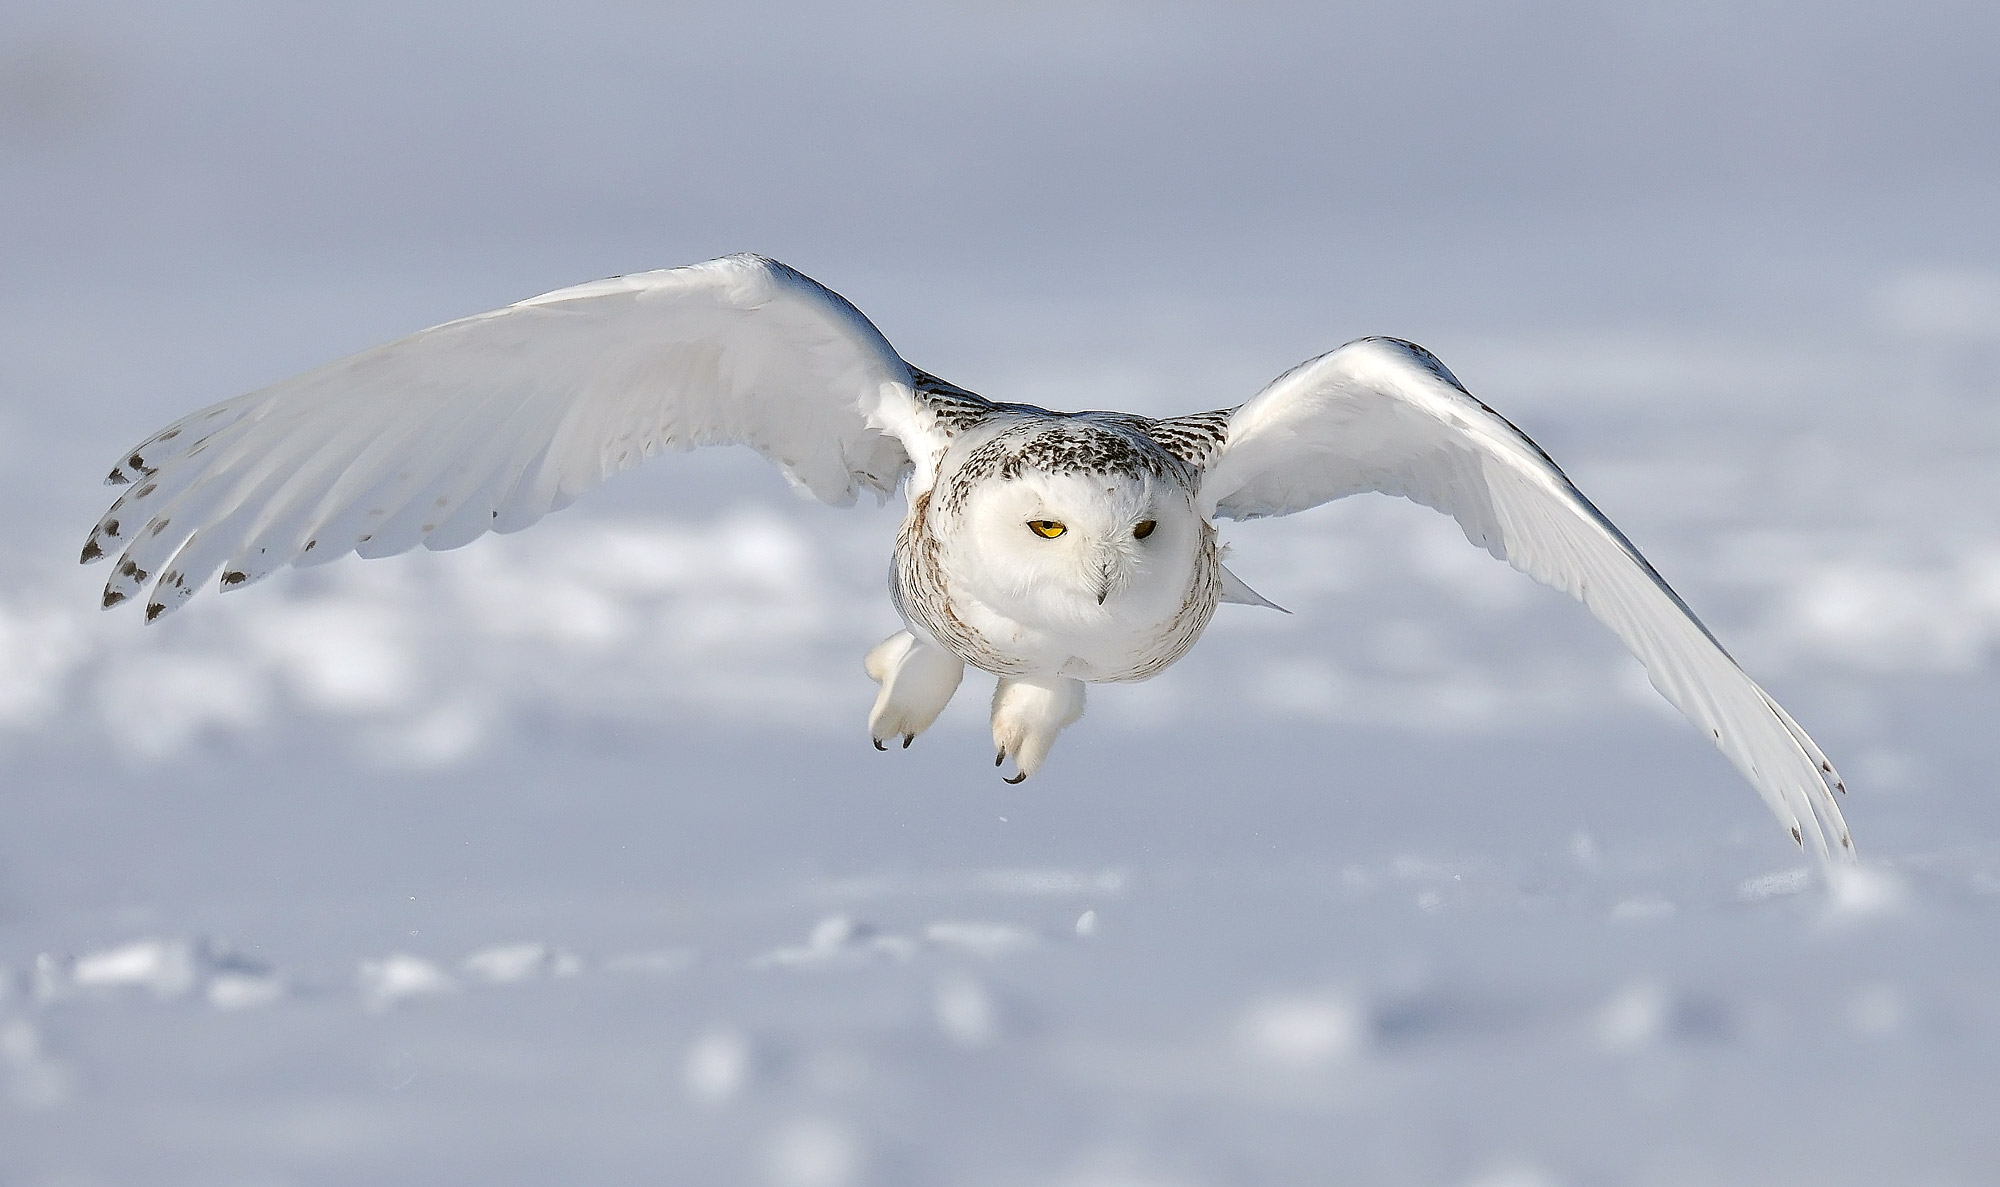 Snowy Owl Facts and Adaptations - Bubo scandiacus / scandiaca